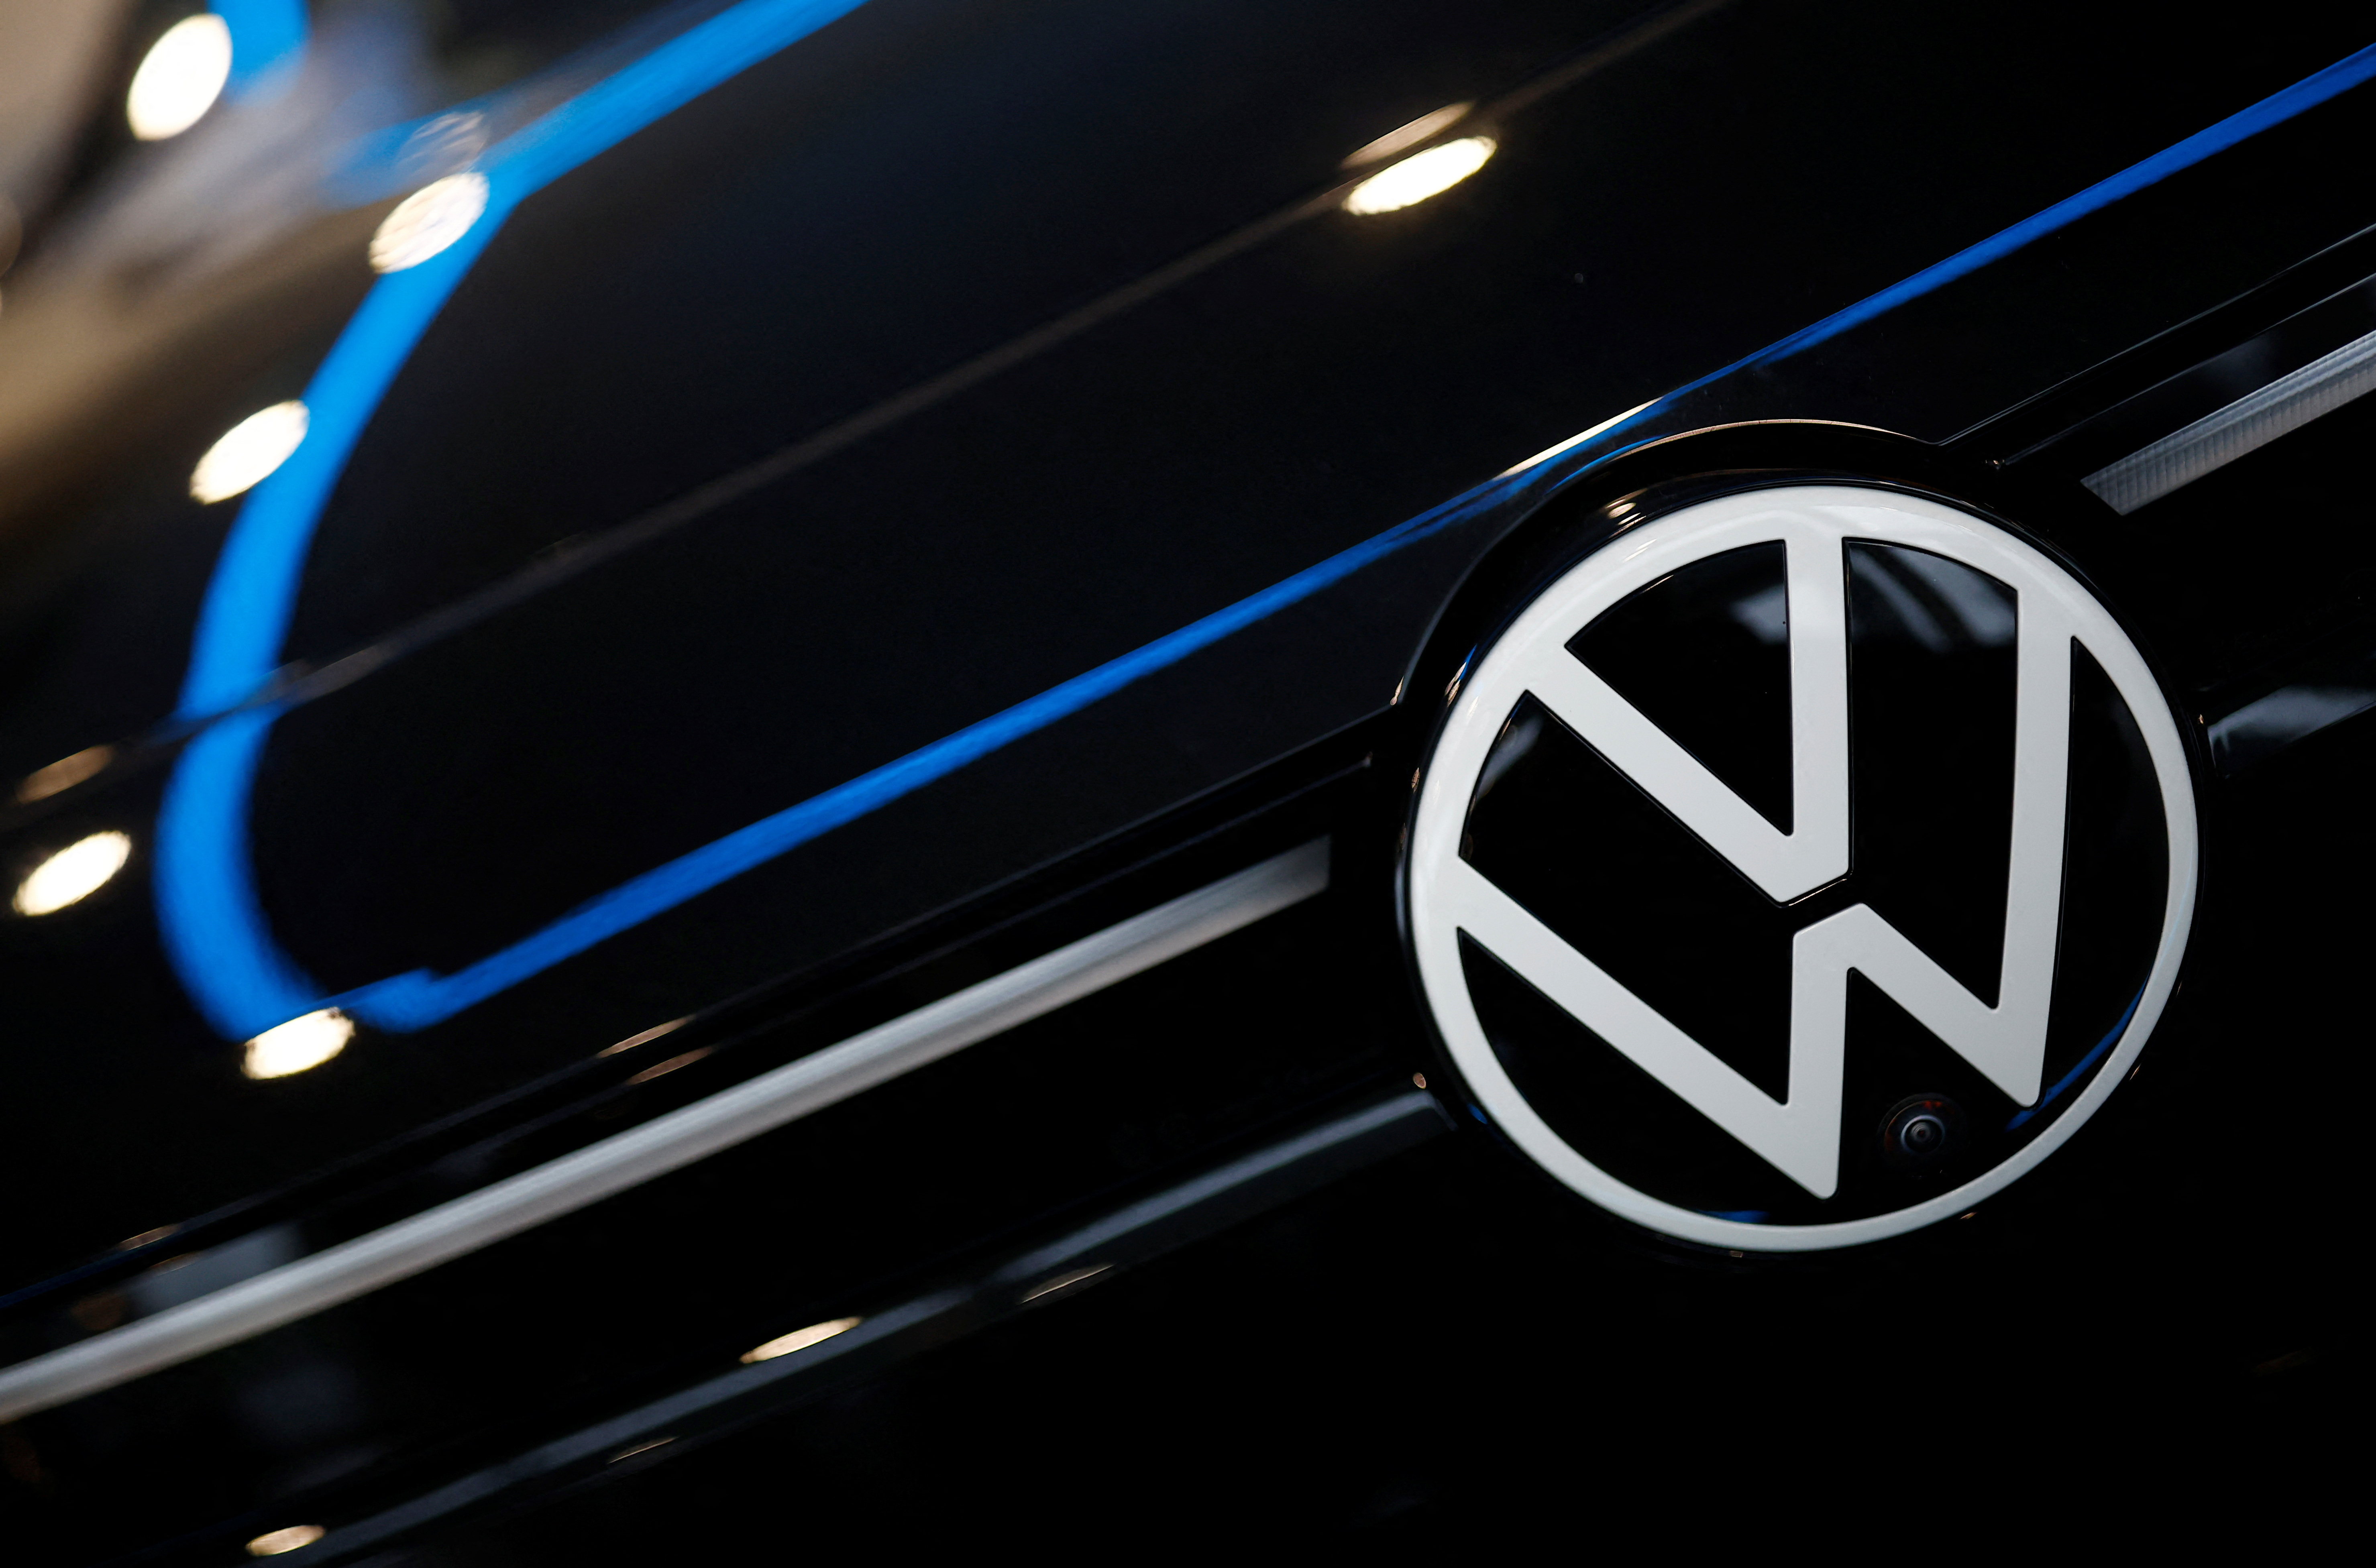 VW considering cooperation with Renault on 20,000-euro electric car  -Handelsblatt